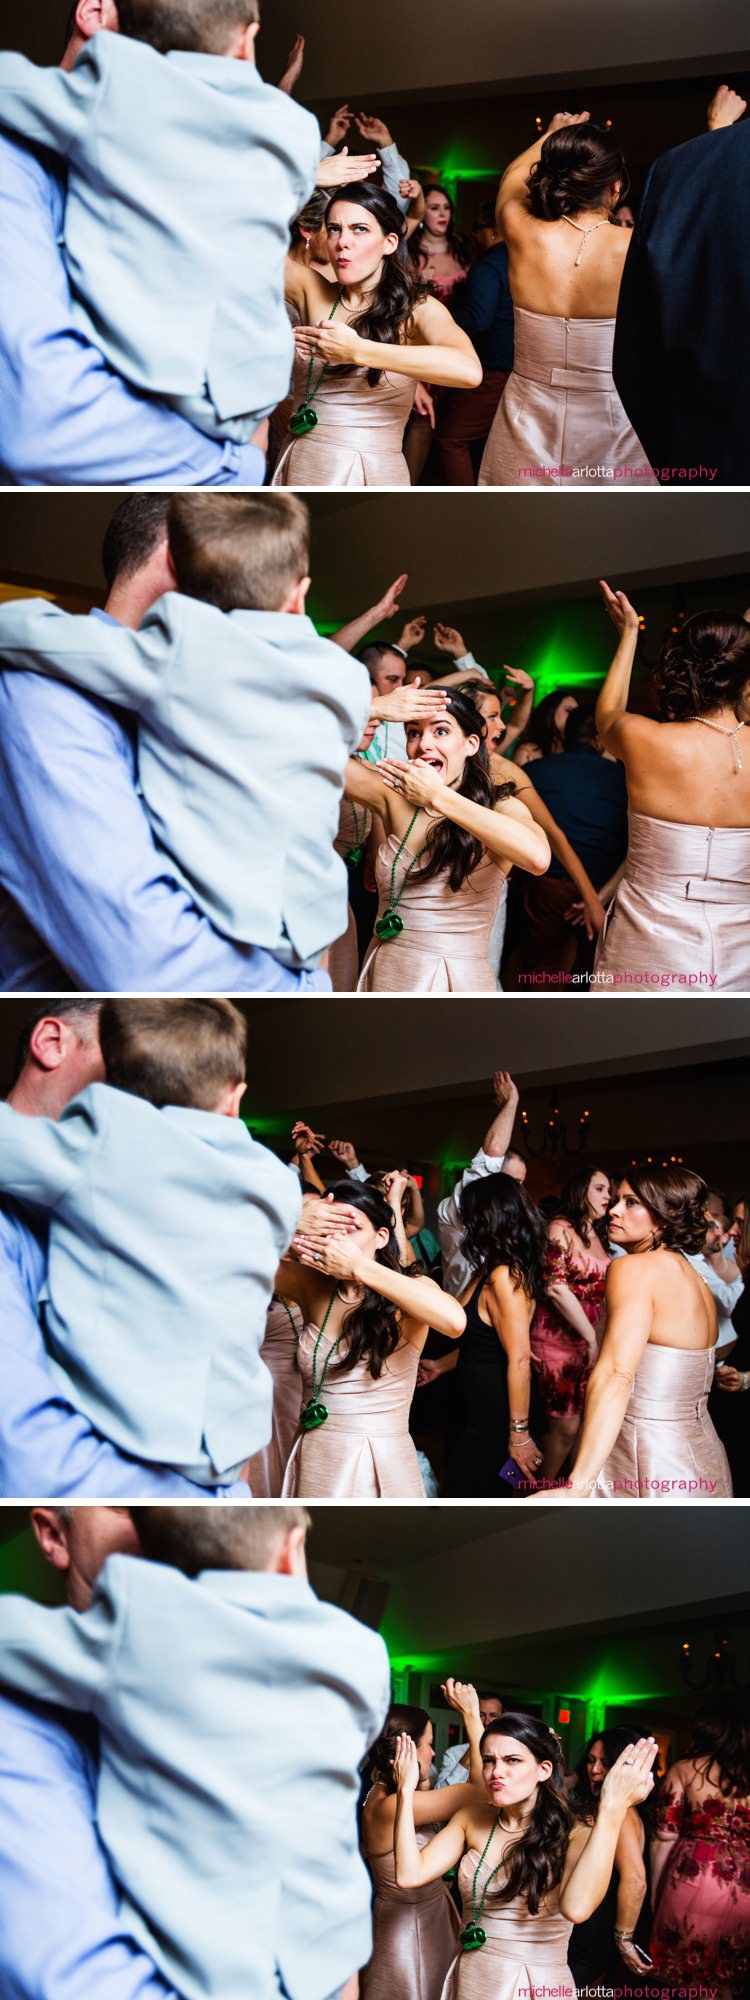 bridesmaid makes a series of faces at little kid during wedding reception